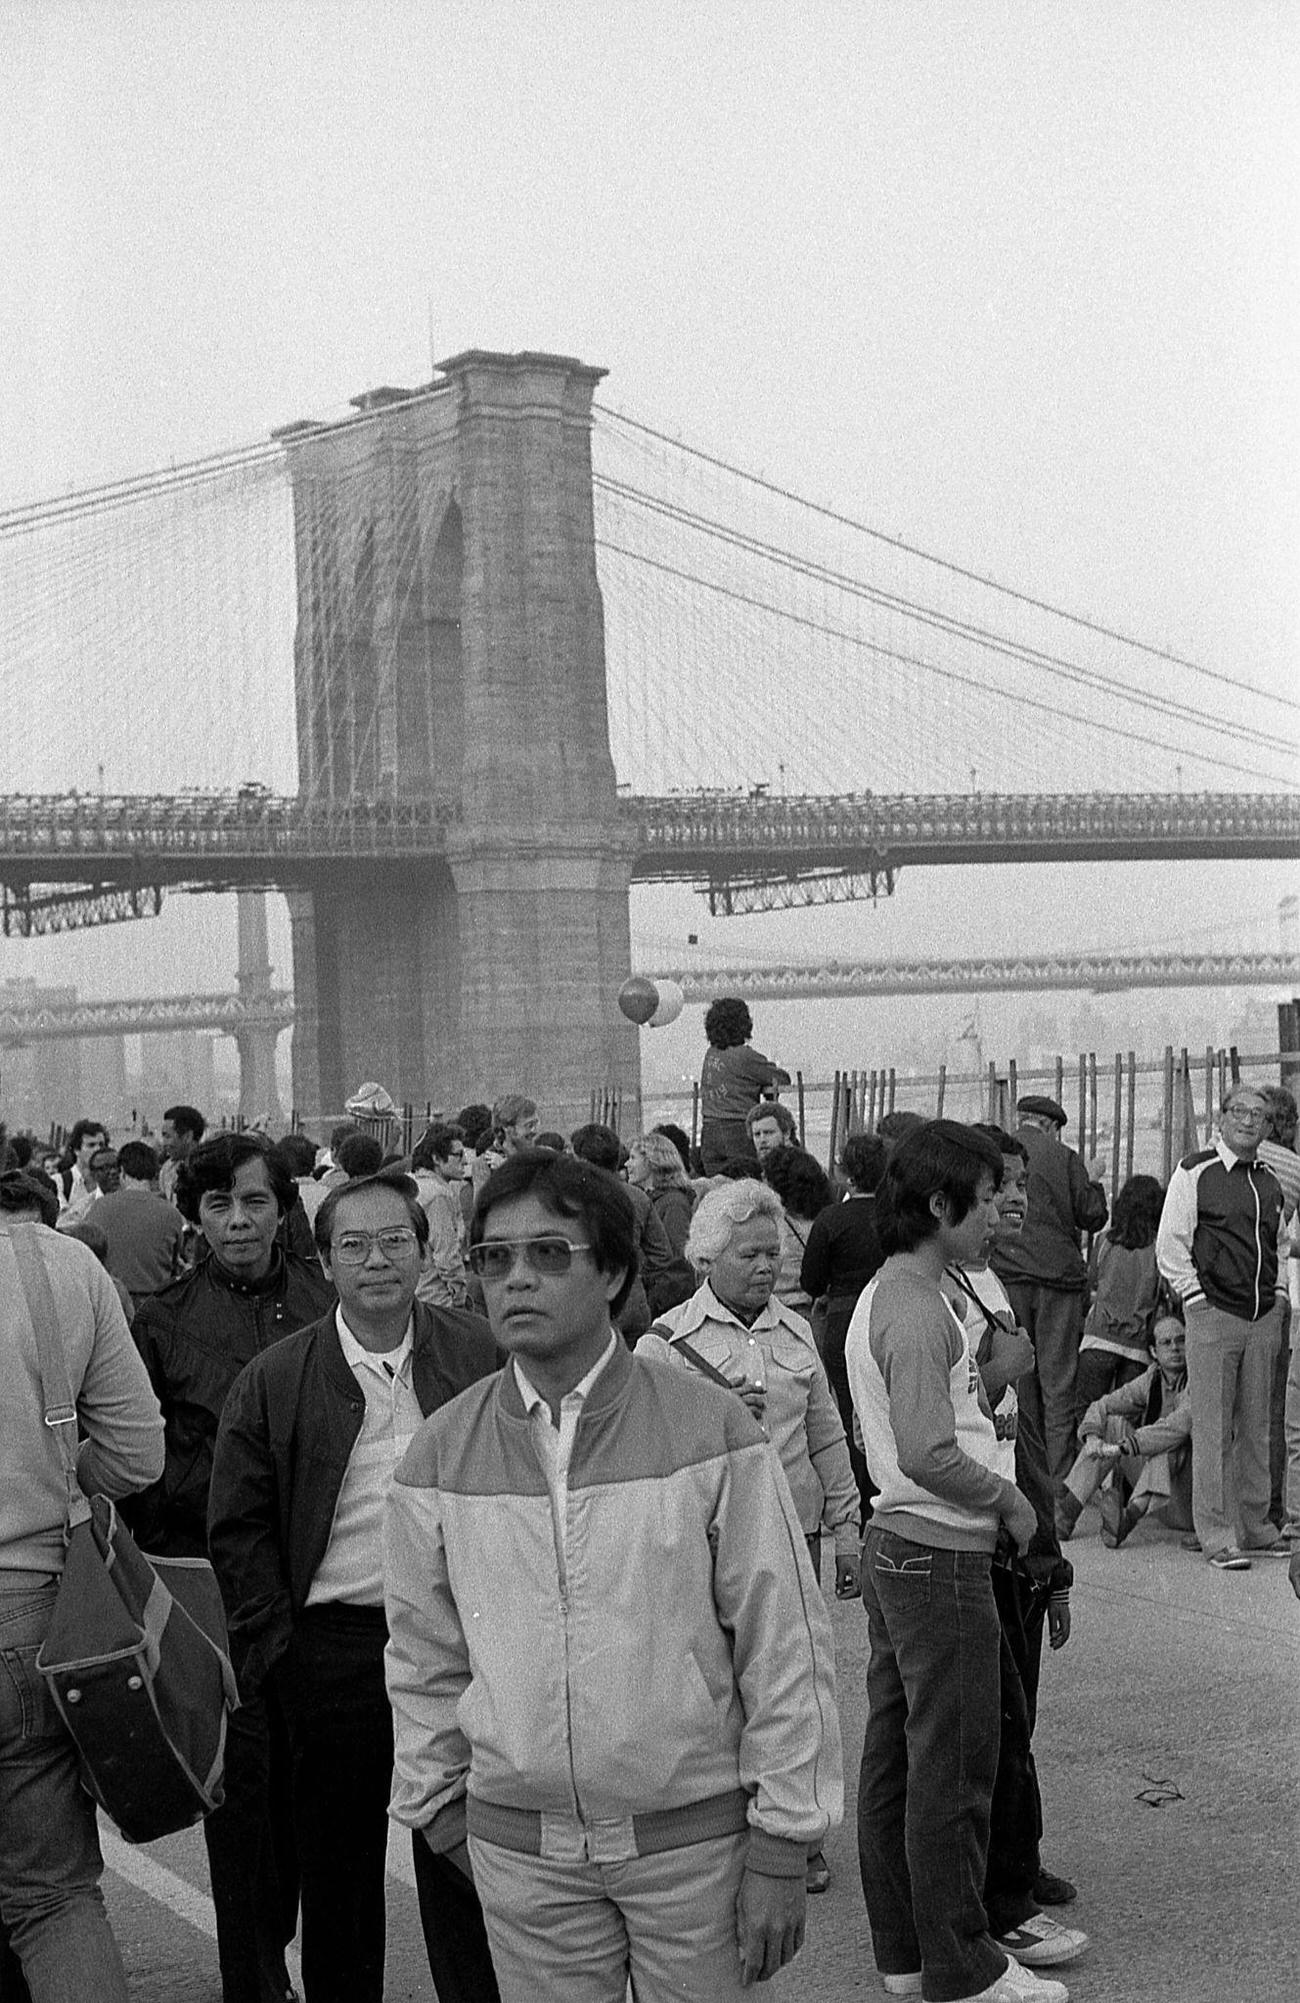 Spectators At South Street Seaport During Brooklyn Centennial, 1983